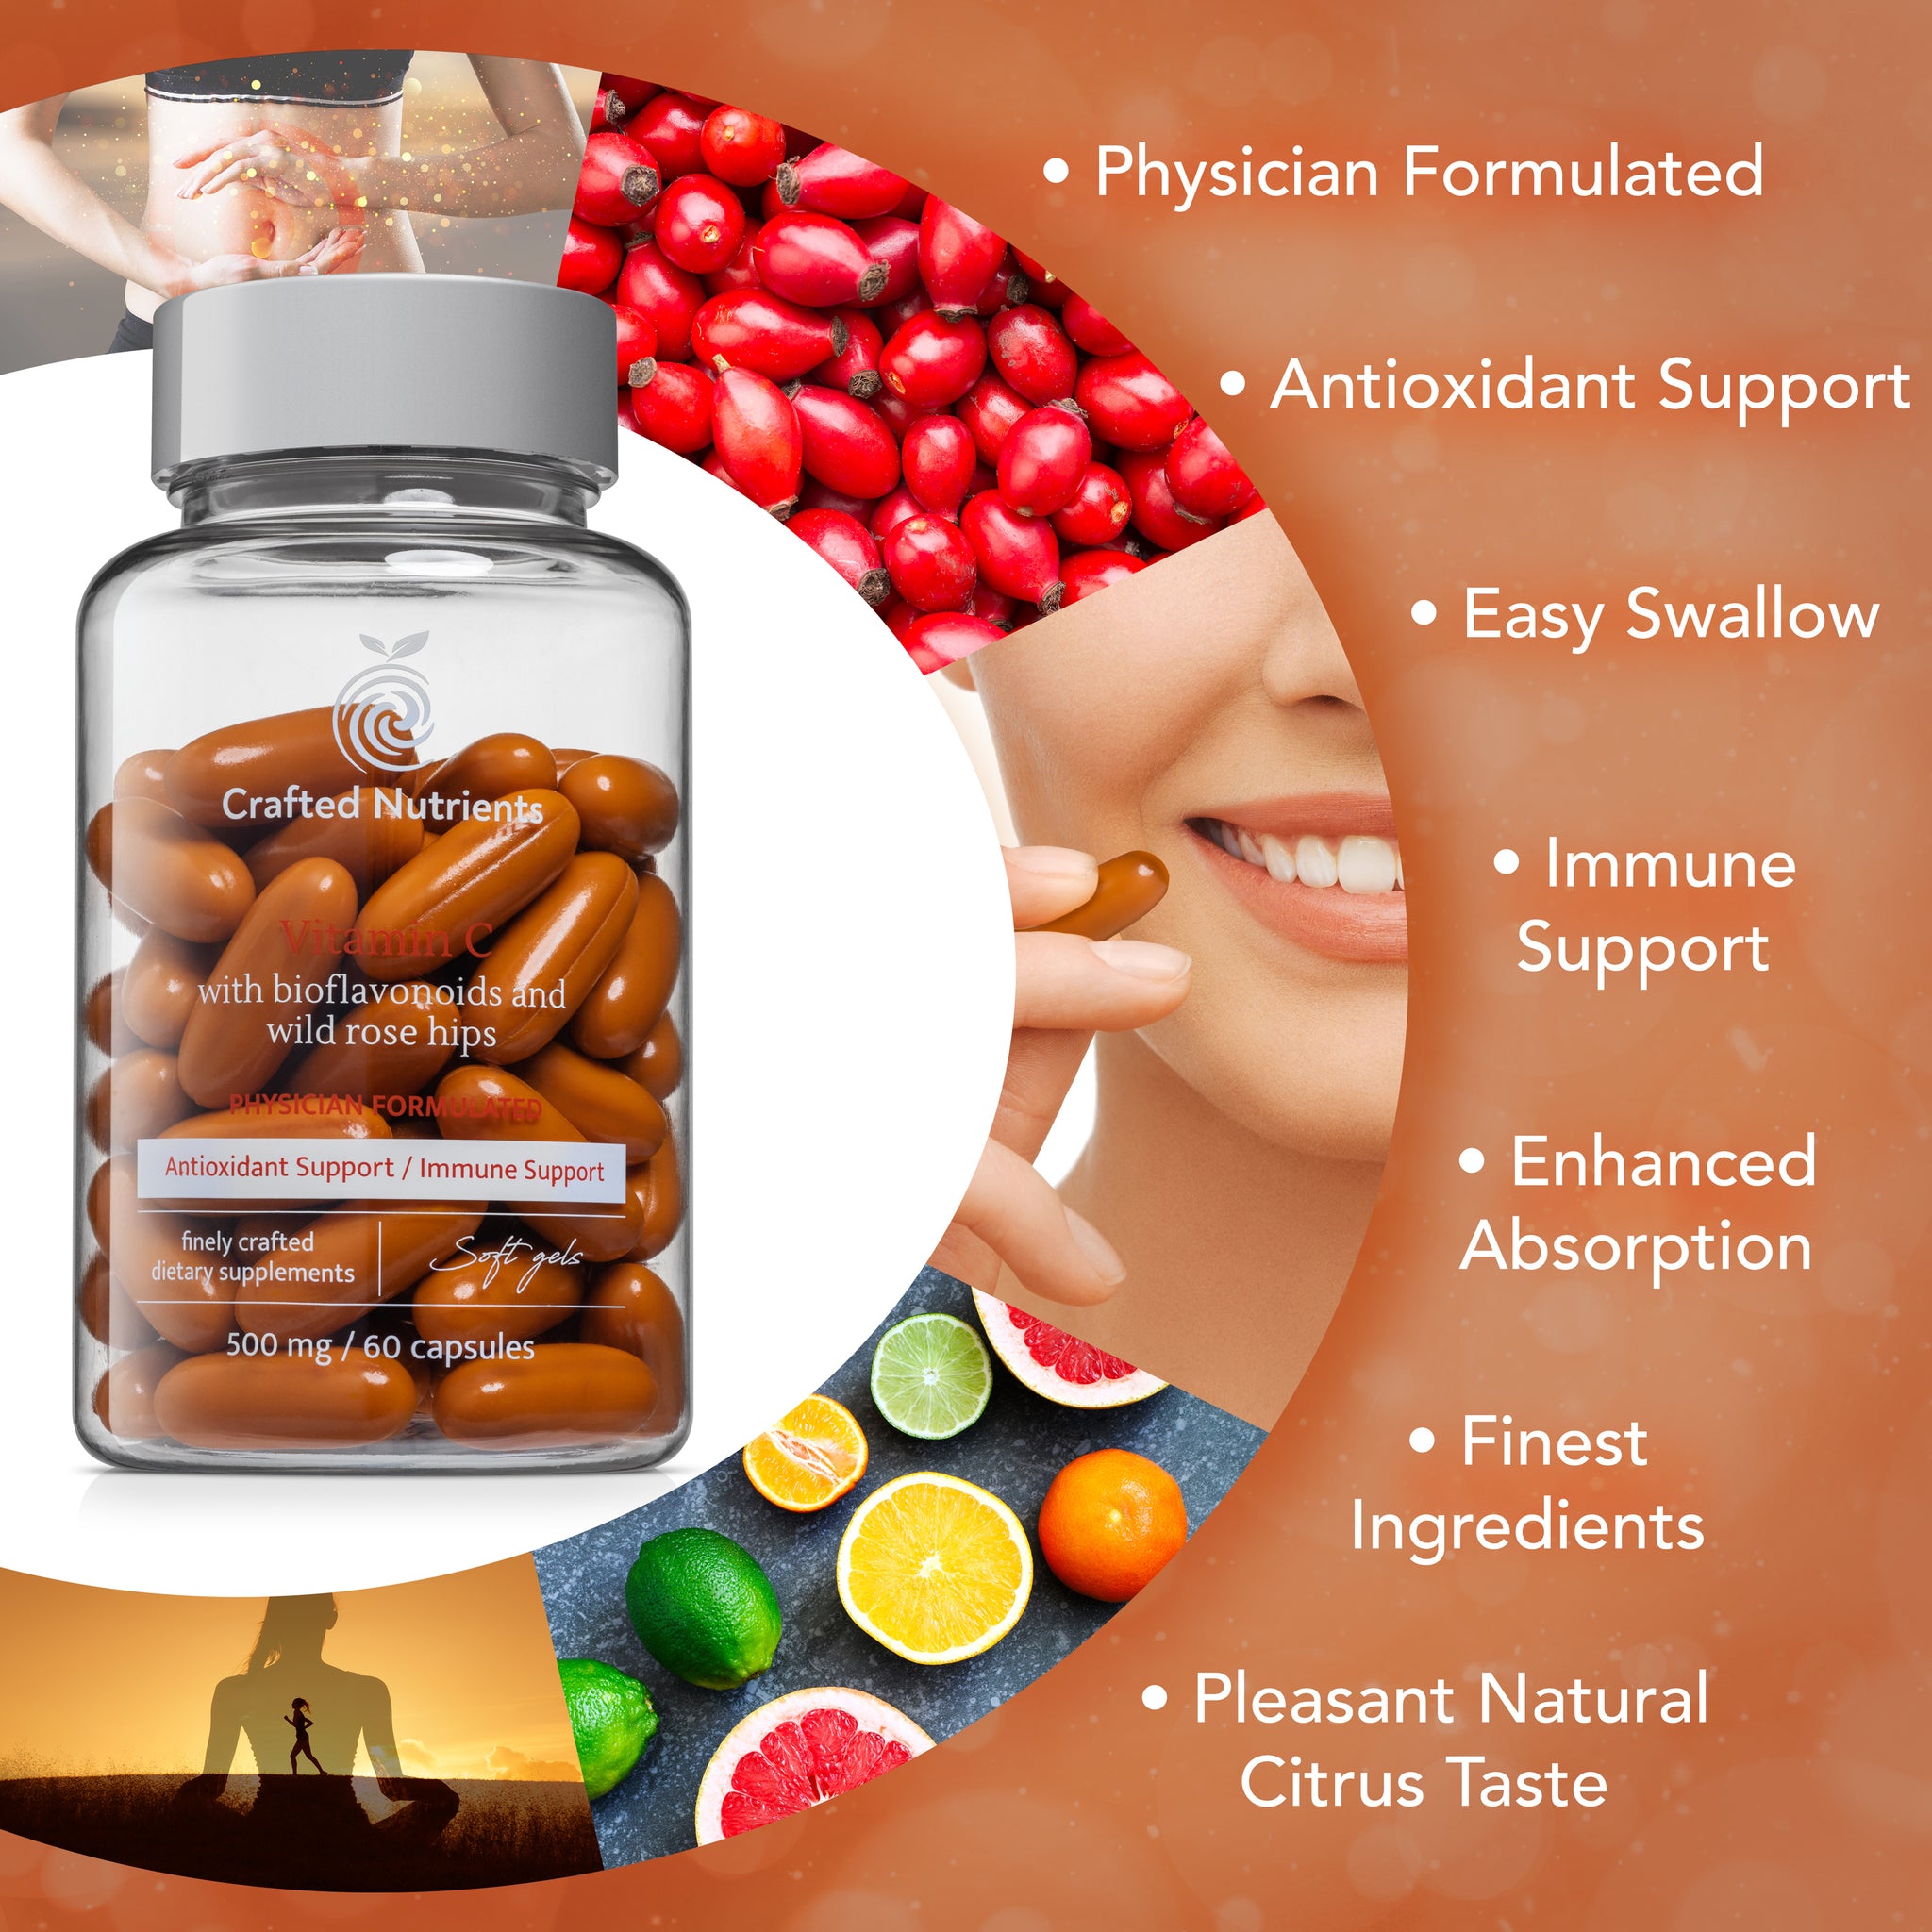 Crafted Nutrients Vitamin C With Bioflavonoids & Wild Rose Hips